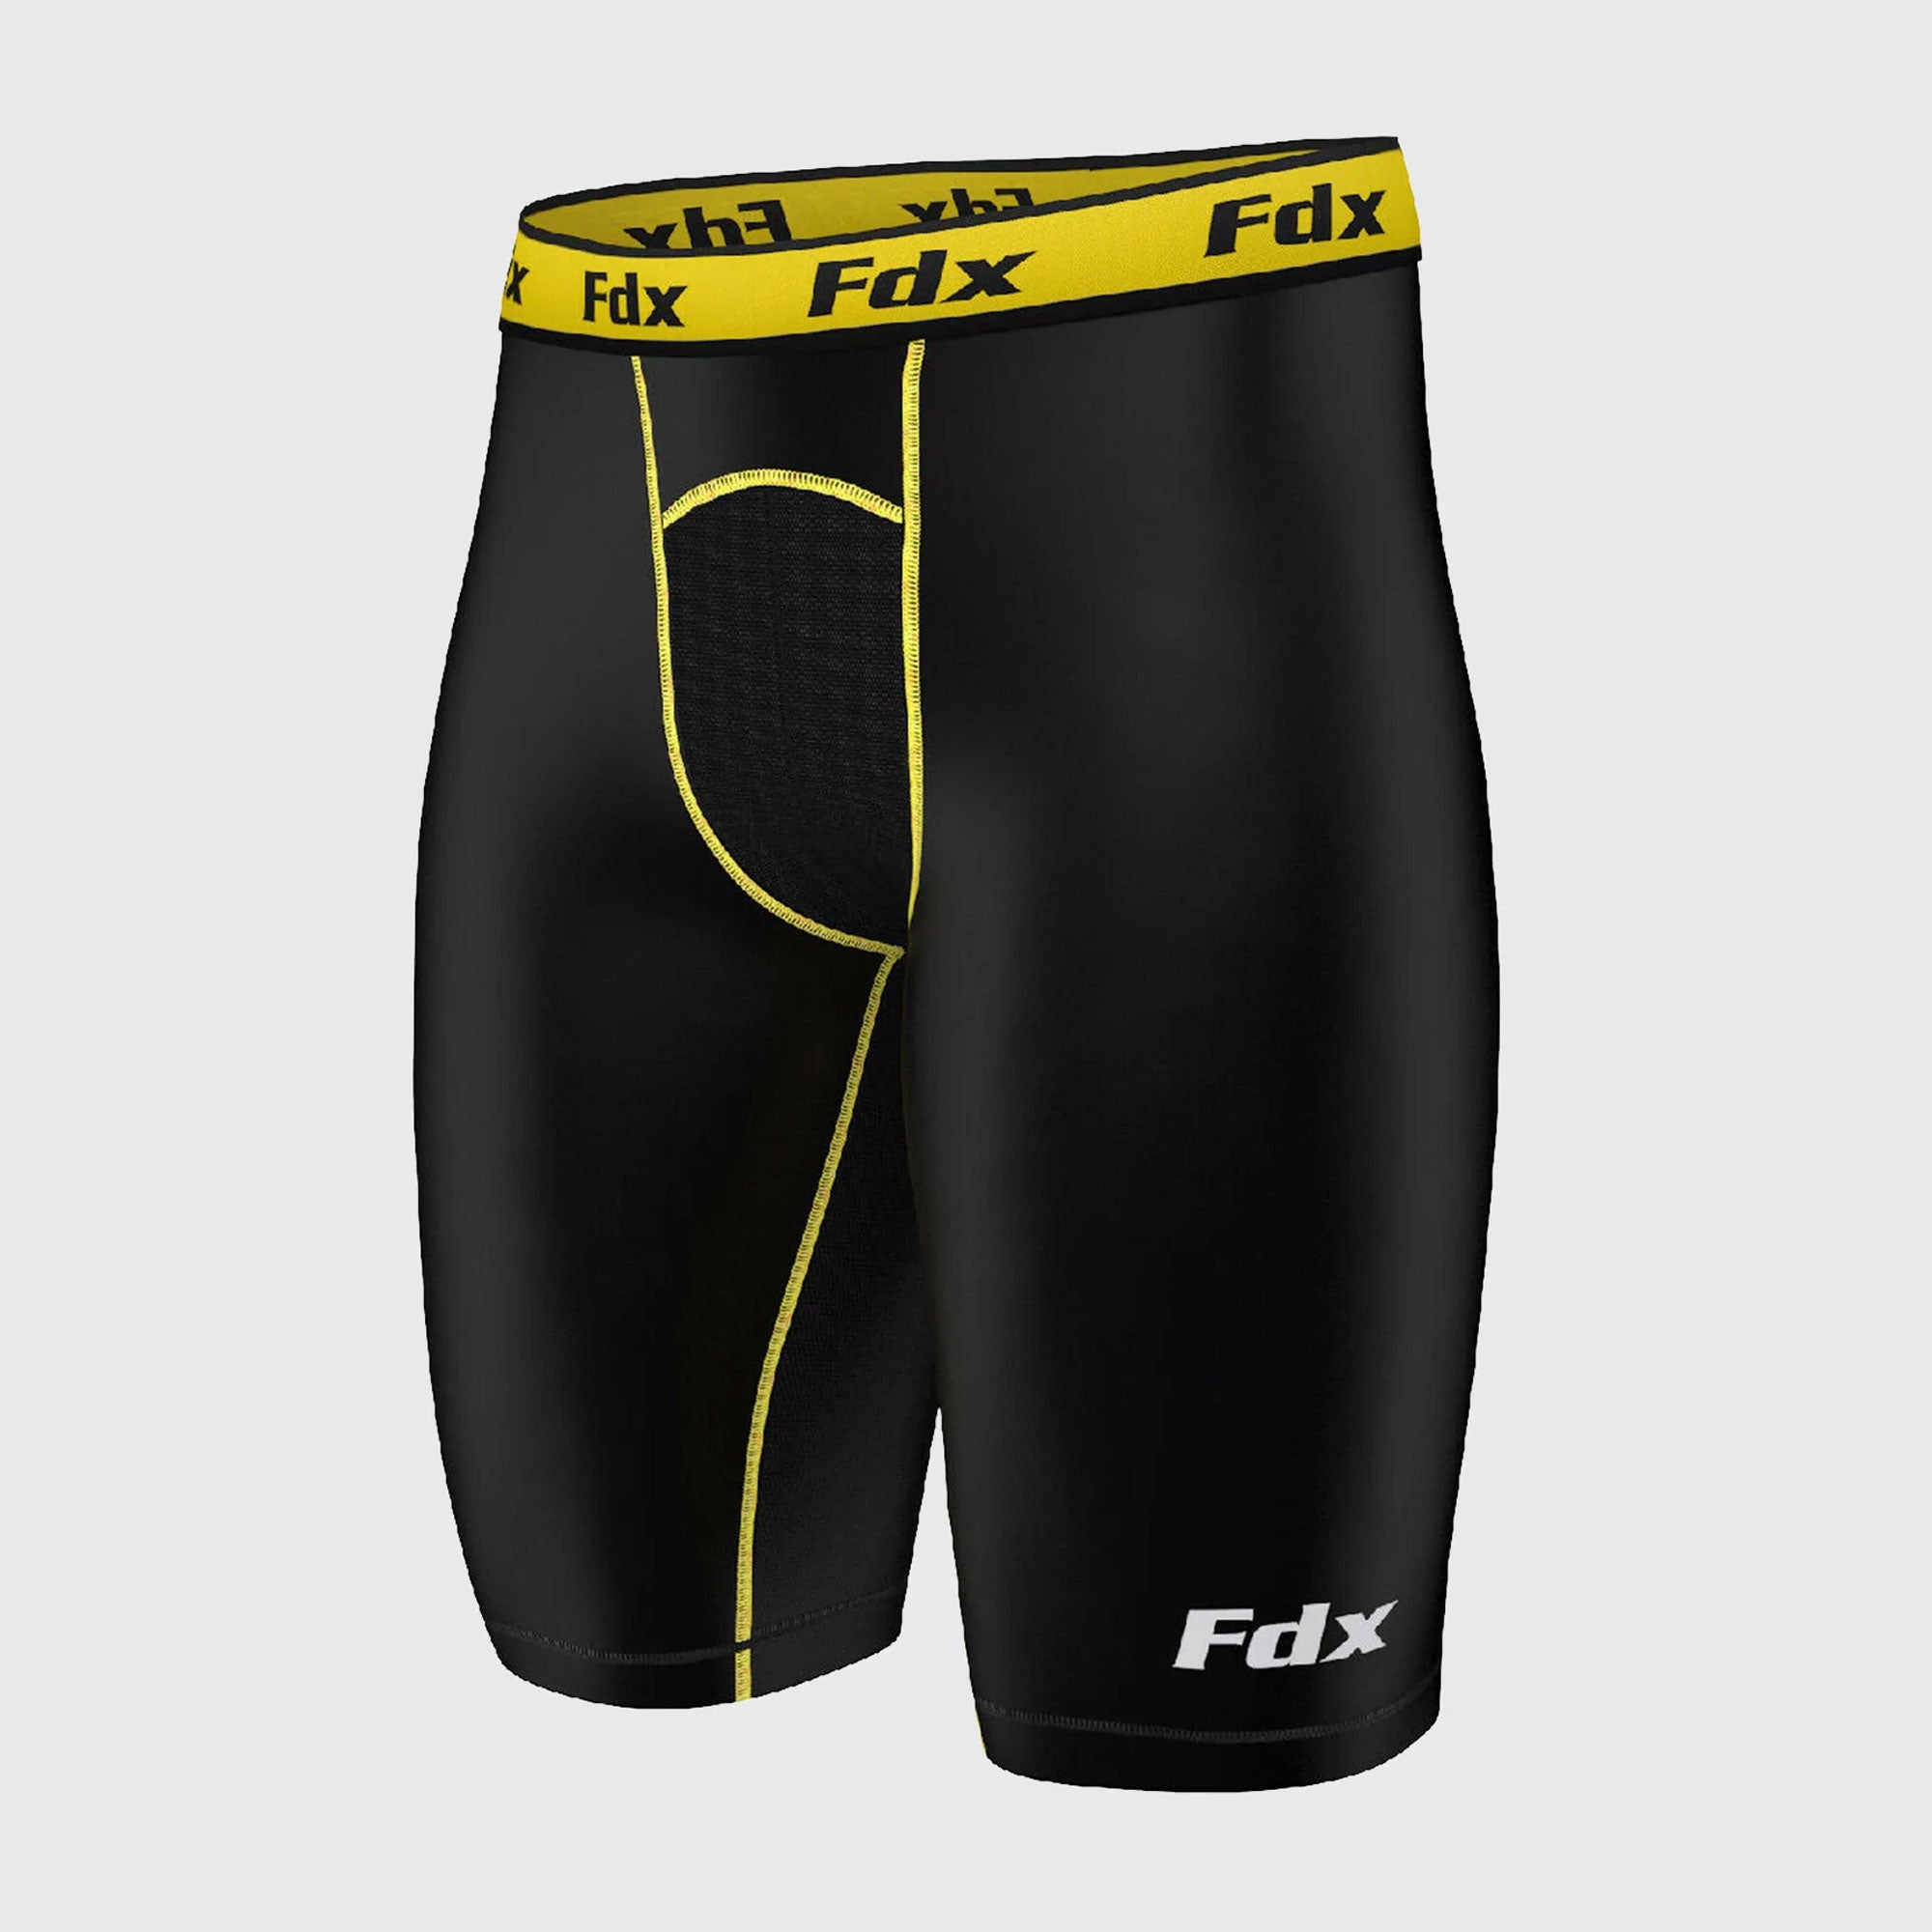 Fdx Men's Black & Yellow Compression Shorts Gym Workout Running Athletic Yoga Elastic Waistband Stretchable Breathable